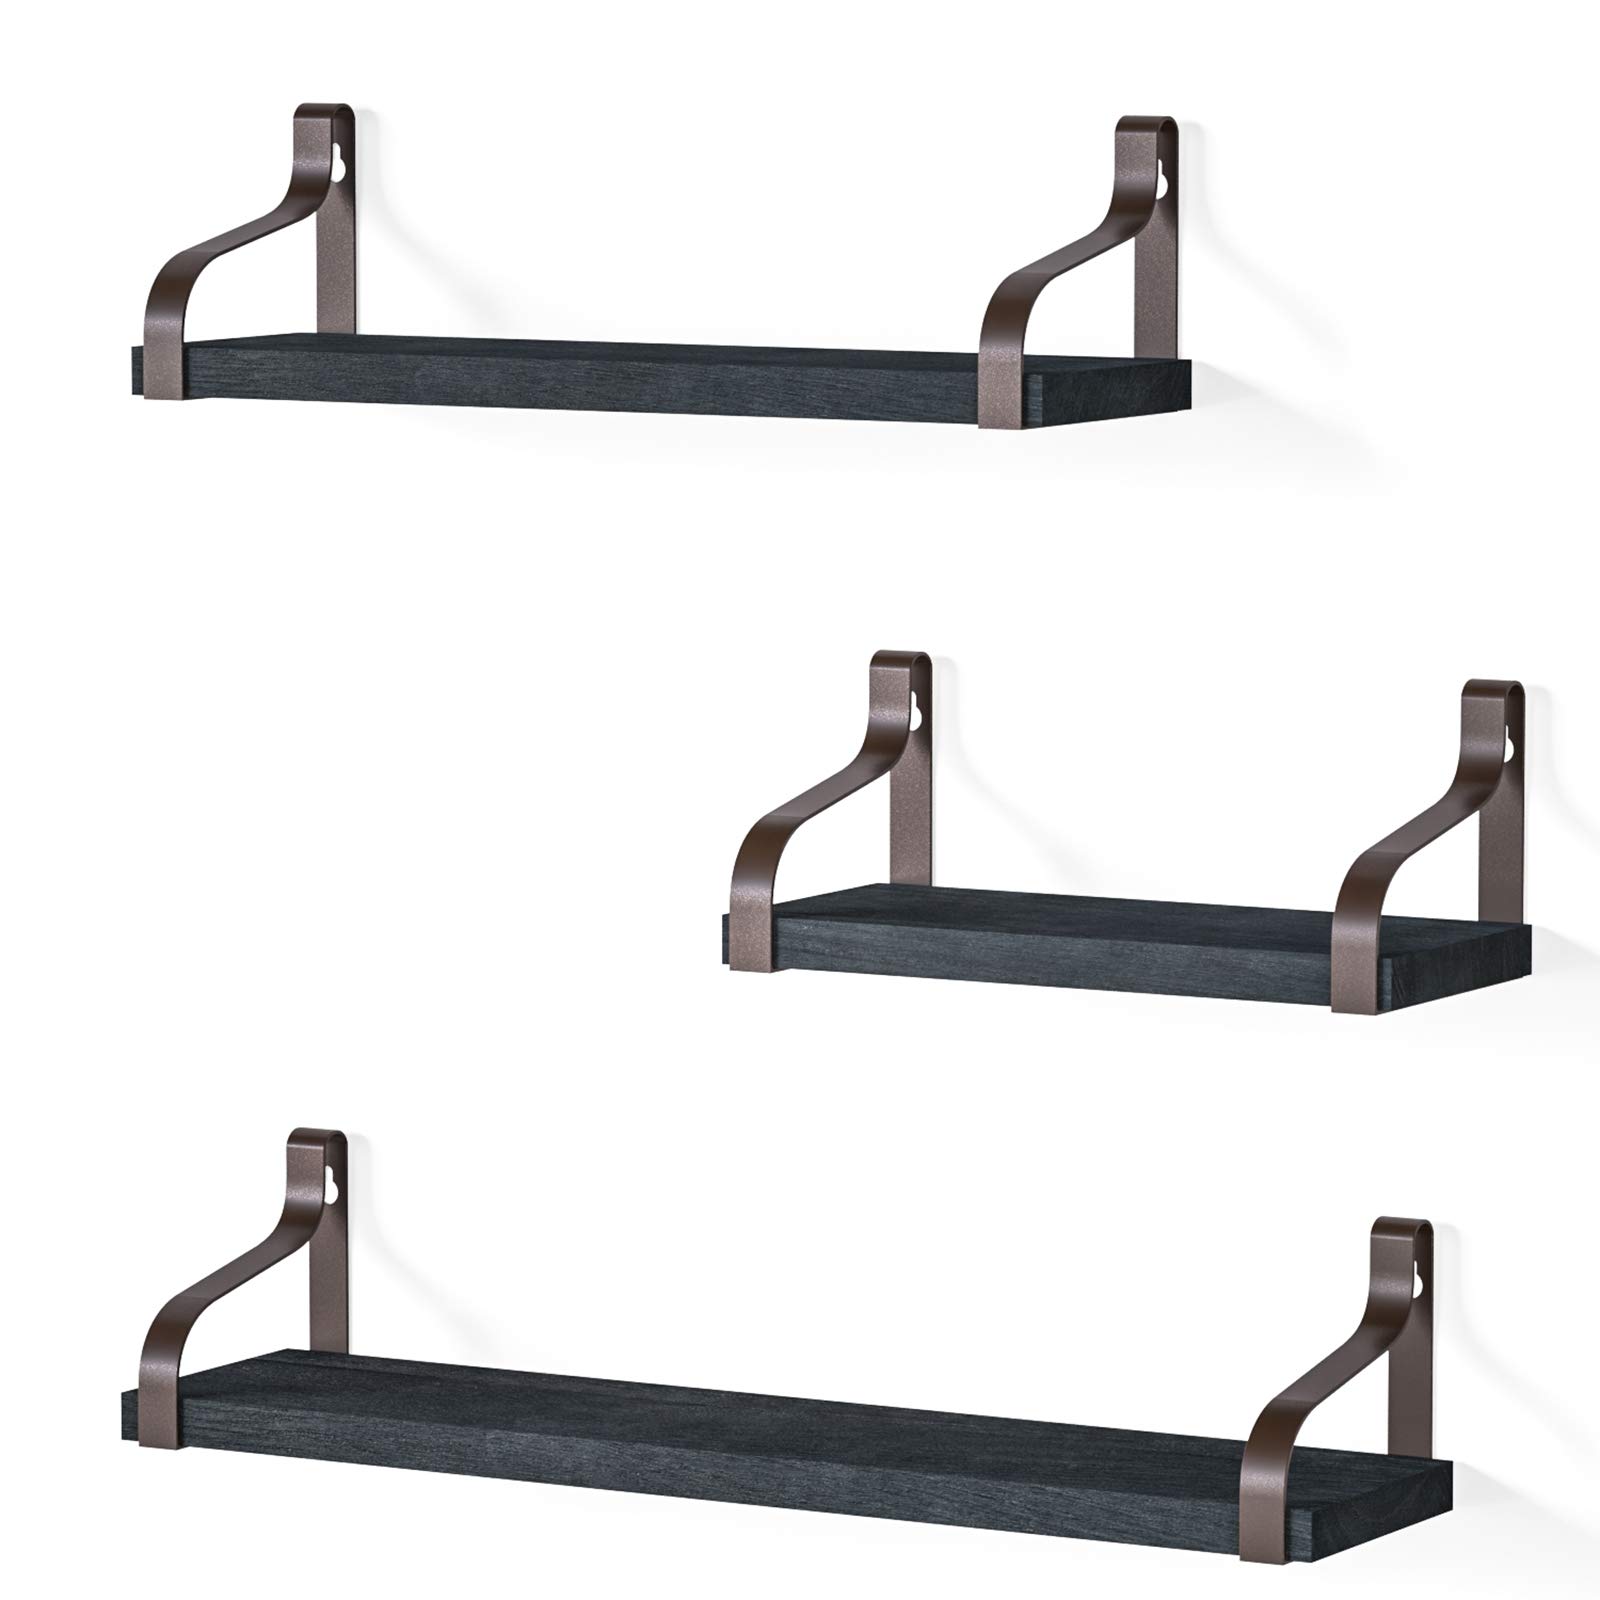 3-Pack Wall Mounted Floating Wood Shelves w/ Metal Brackets (Black w/ Brown Brackets) $9.99 + Free Shipping w/ Prime